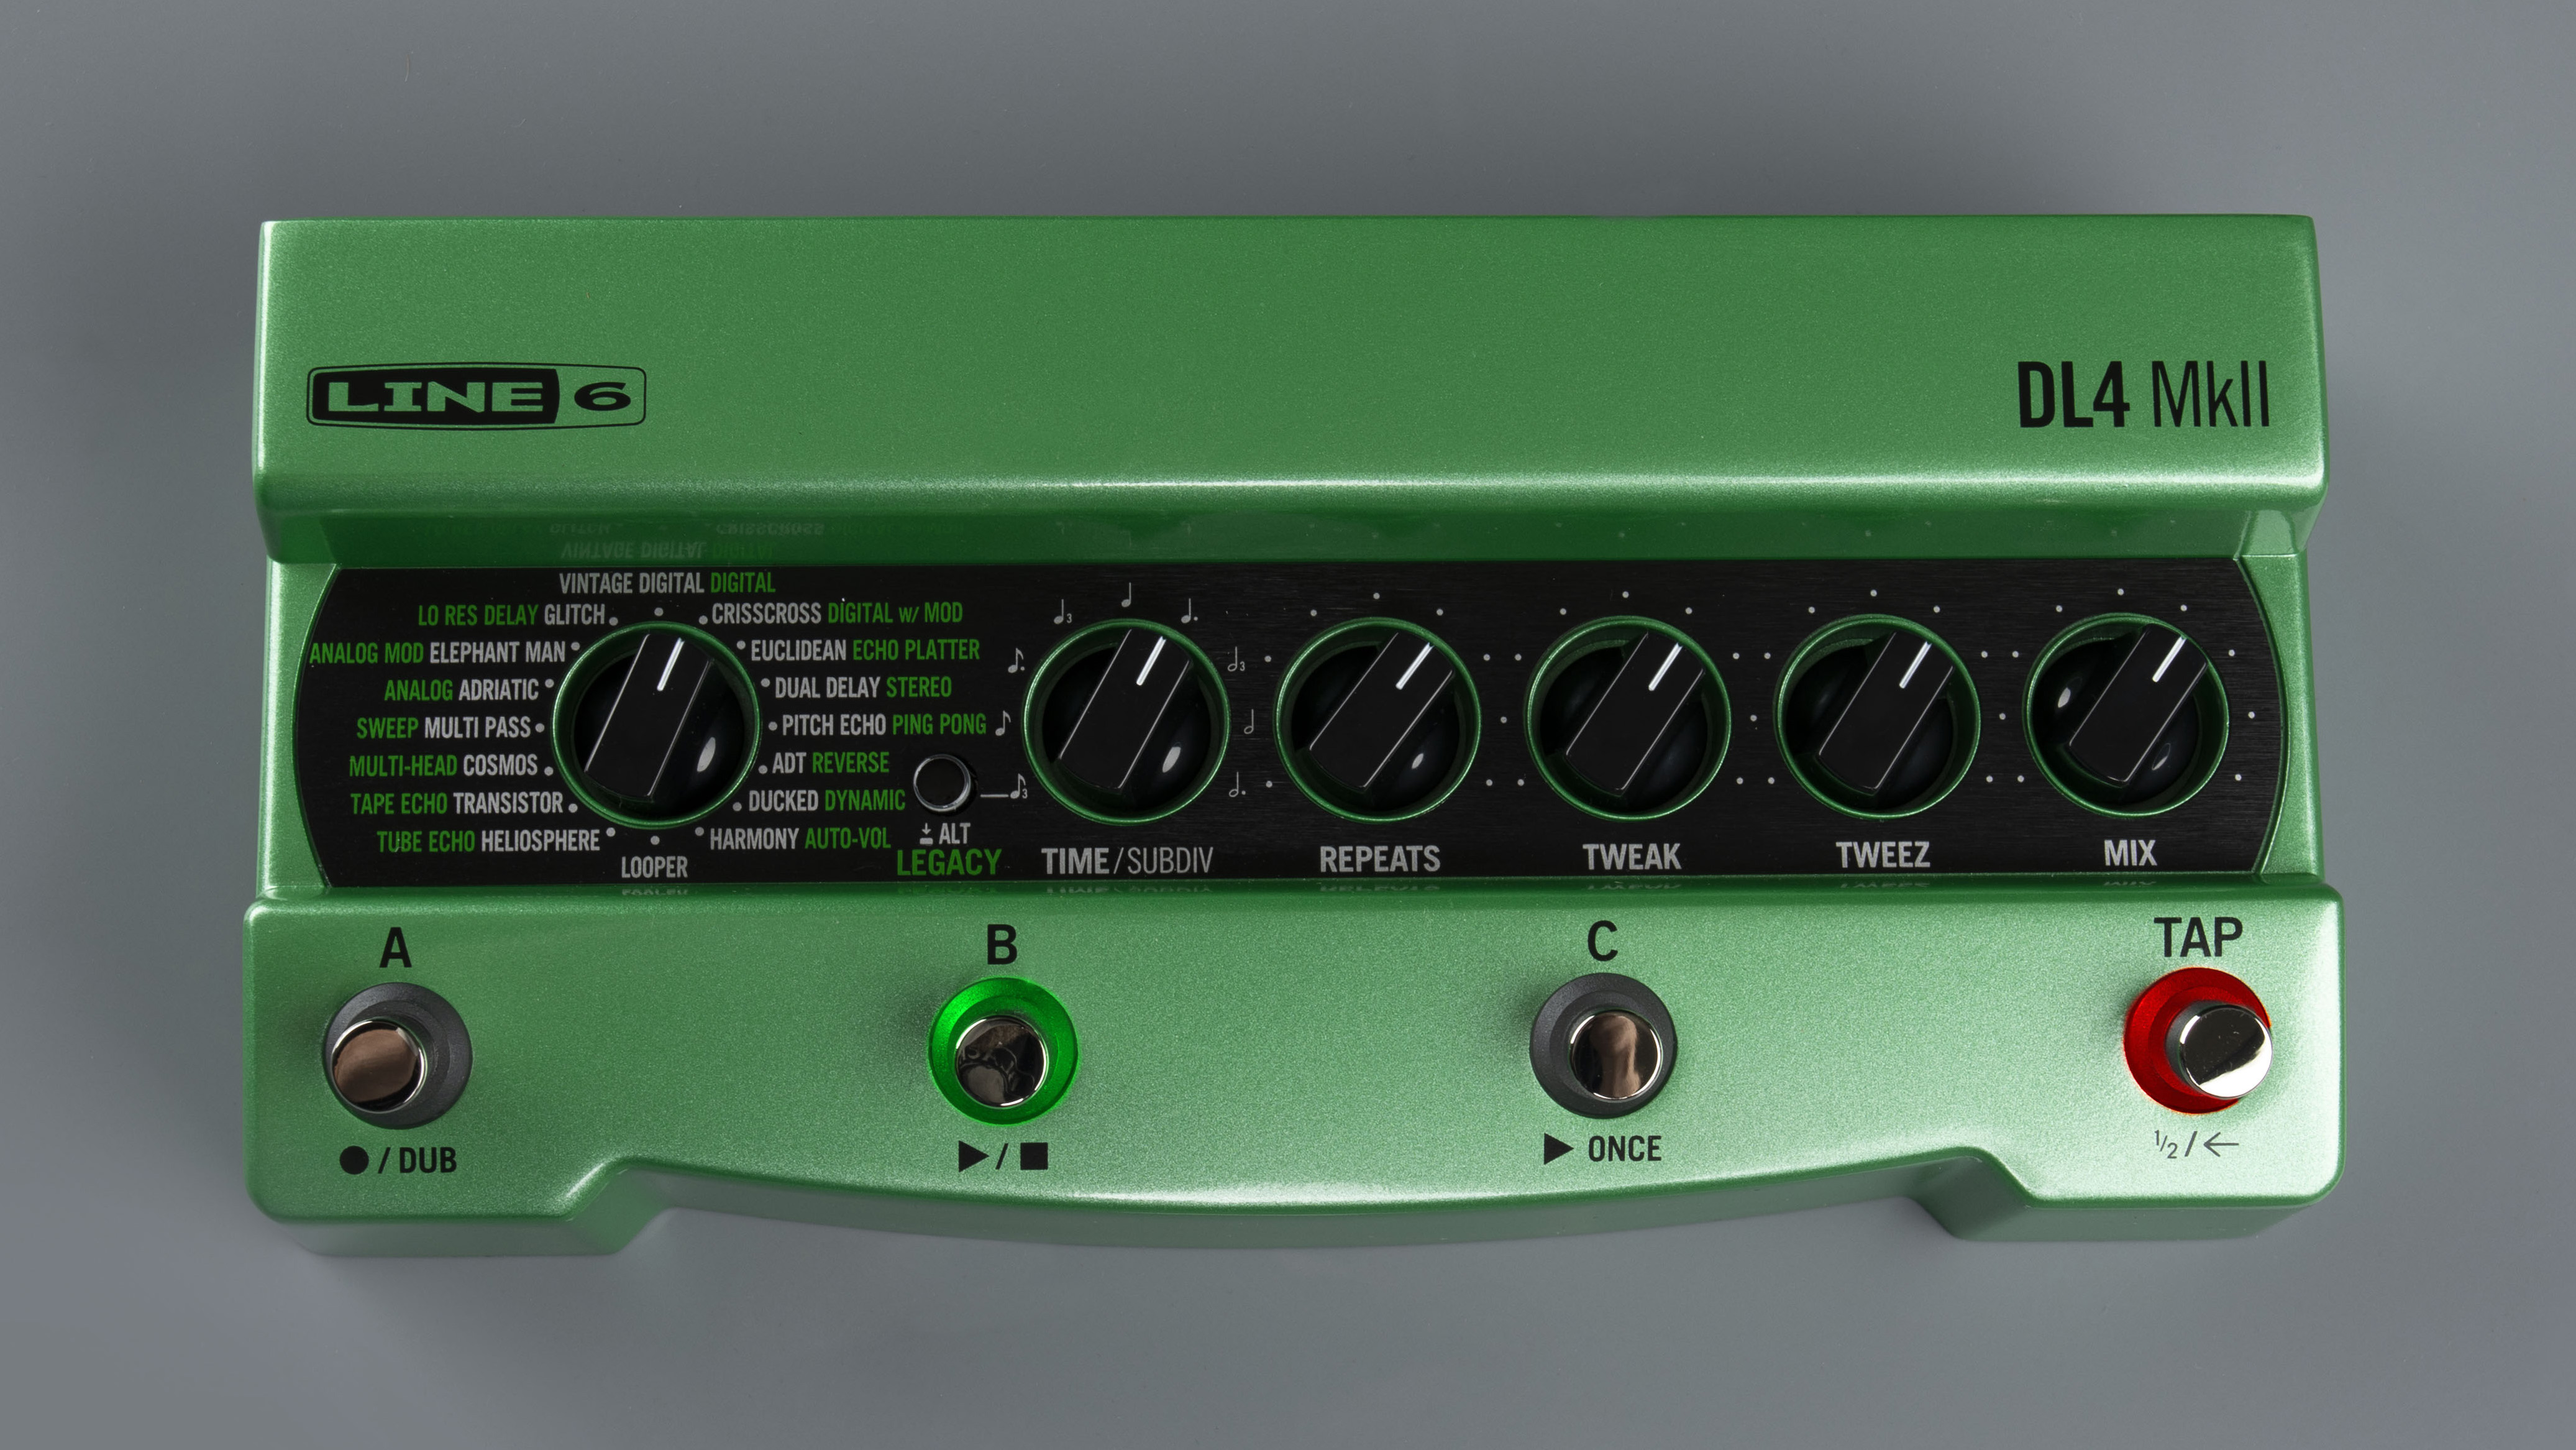 Line 6 officially reveals the DL4 MKII Delay modeller pedal